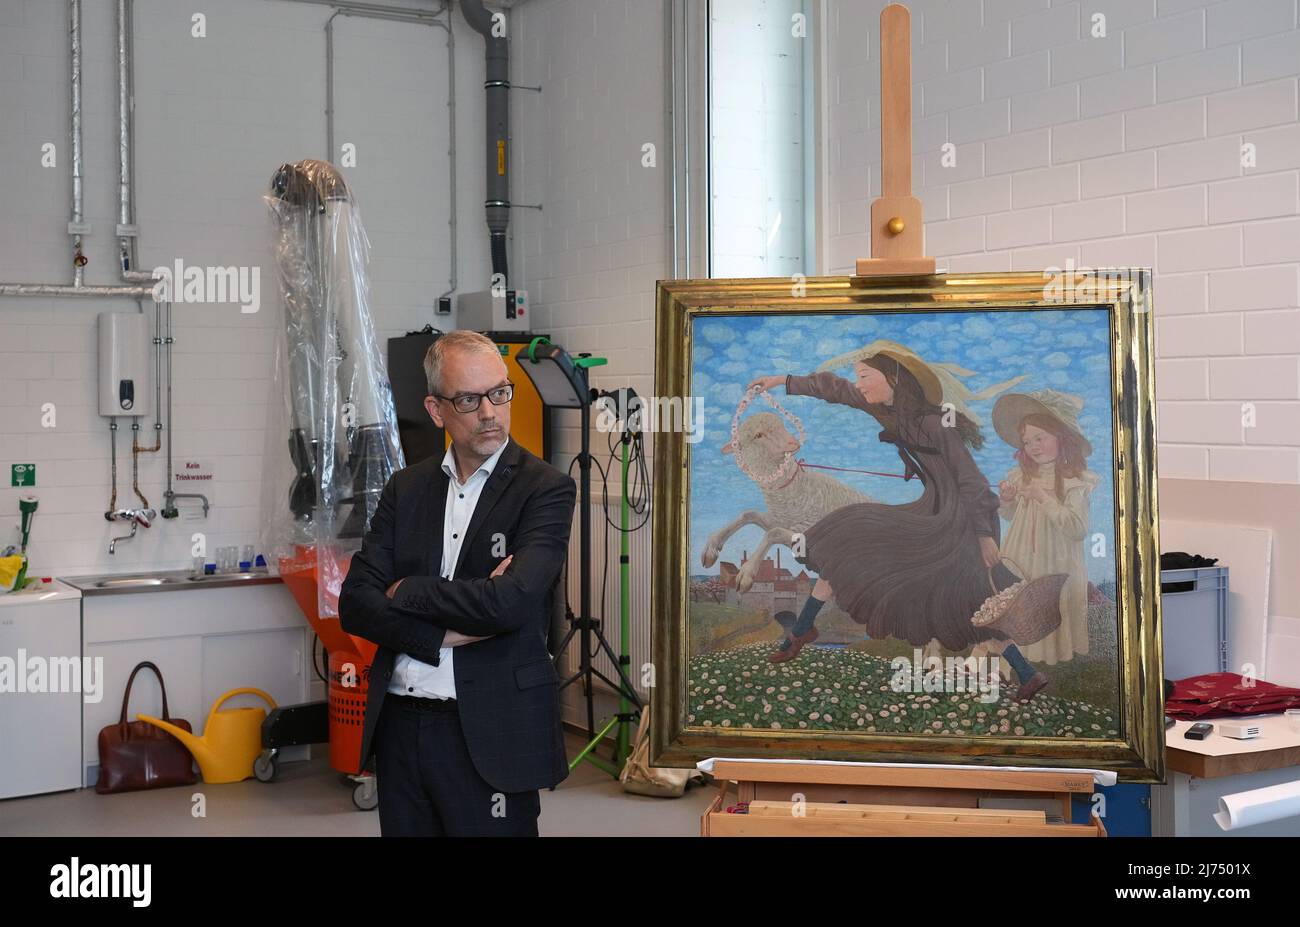 06 May 2022, Brandenburg, Potsdam: Christoph Martin Vogtherr, General Director of the Prussian Palaces and Gardens Foundation Berlin-Brandenburg (SPSG), looks at the painting 'Schäfchen' (oil on wood, 1905) by Thomas Theodor Heine in the Central Art Depository. The SPSG gave the painting to the relatives of the original owner, Irene Beran, who live in Great Britain, 81 years after it was expropriated by the Nazis. The house and collection of Beran, who lived in Brno, had been expropriated as Jewish property by the German occupiers in 1941. Photo: Soeren Stache/dpa Stock Photo